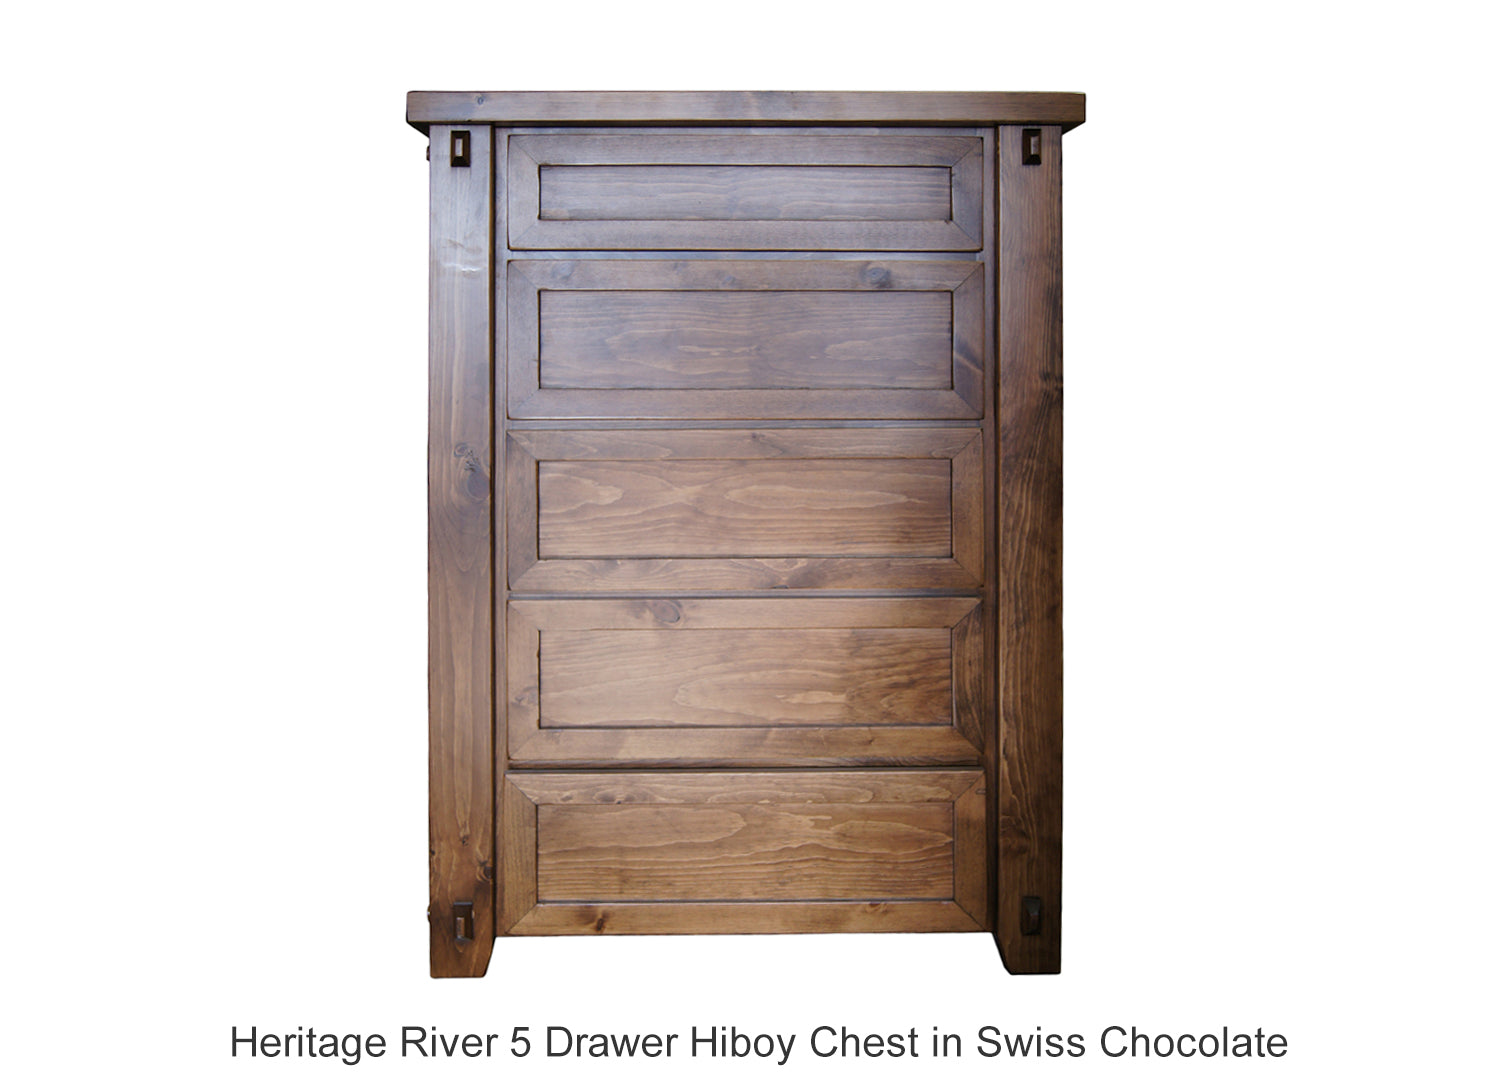 Heritage River 5 Drawer Hiboy Chest in Swiss Chocolate